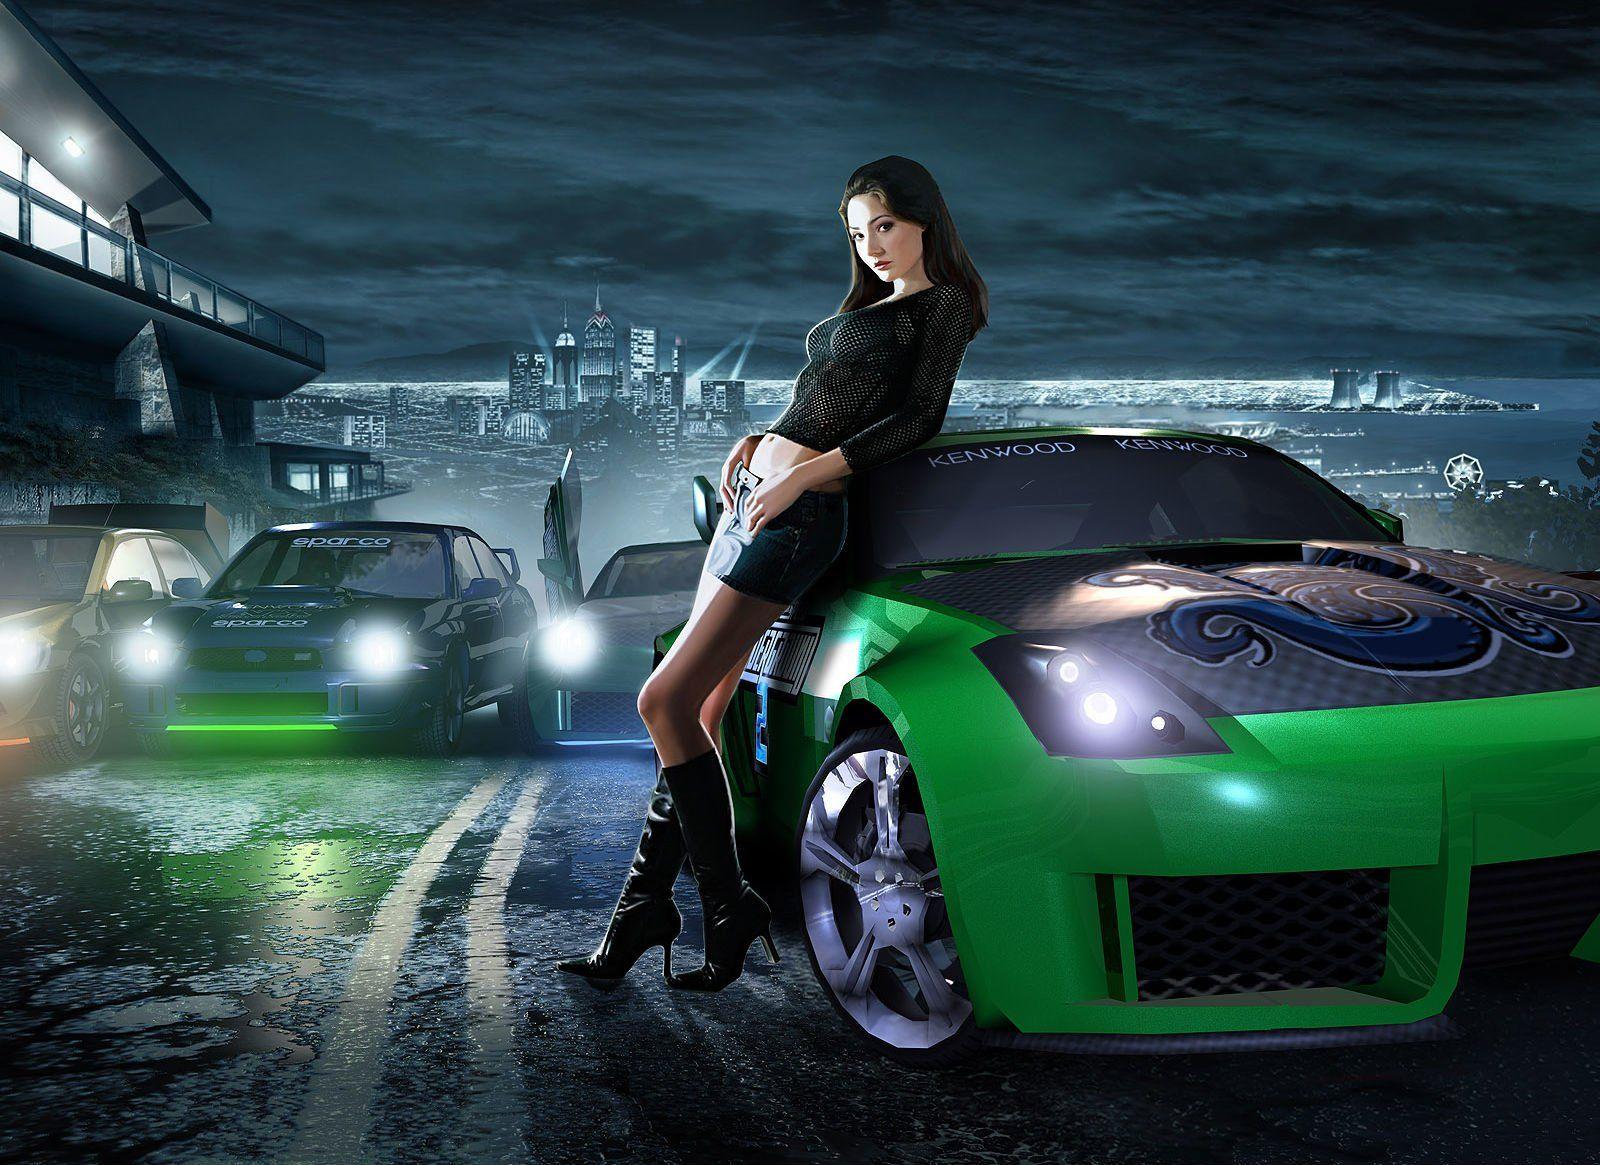 Need for speed underground 3 download for pc windows 7 torrent